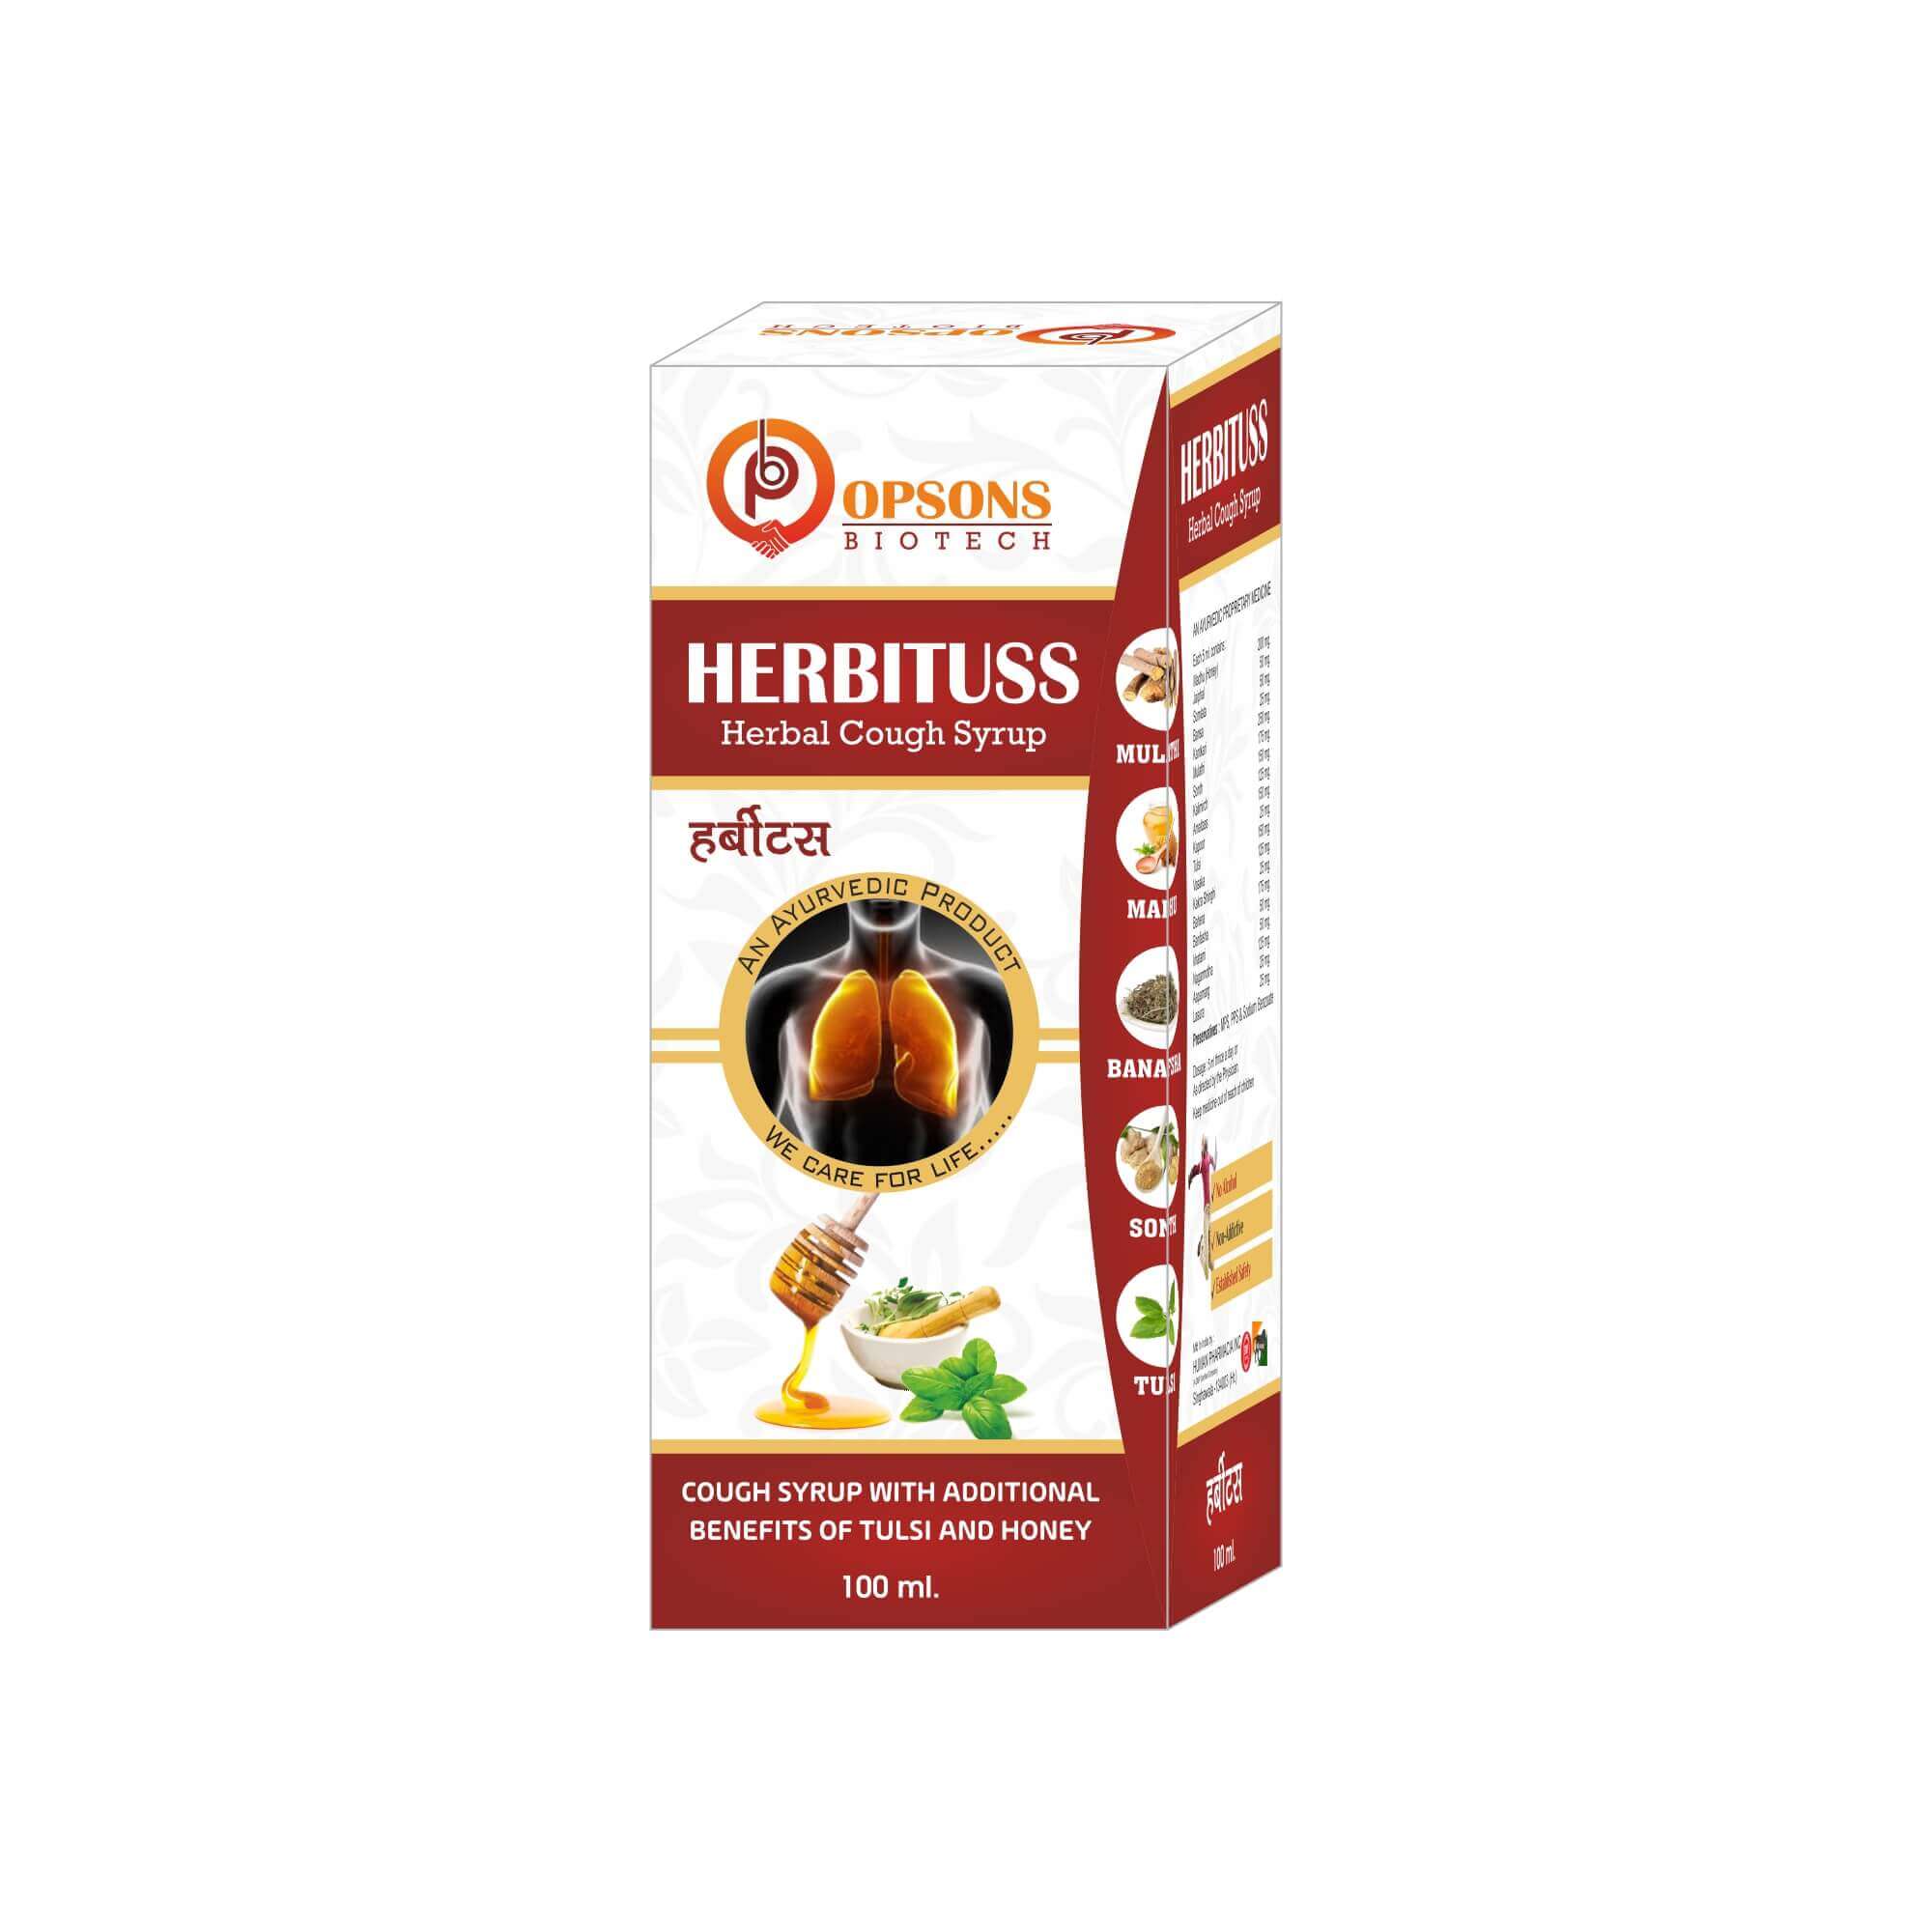 Product Name: Herbituss, Compositions of Herbituss are Cough Syrup with Additional Benefits of tulsi ad honey  - Opsons Biotech